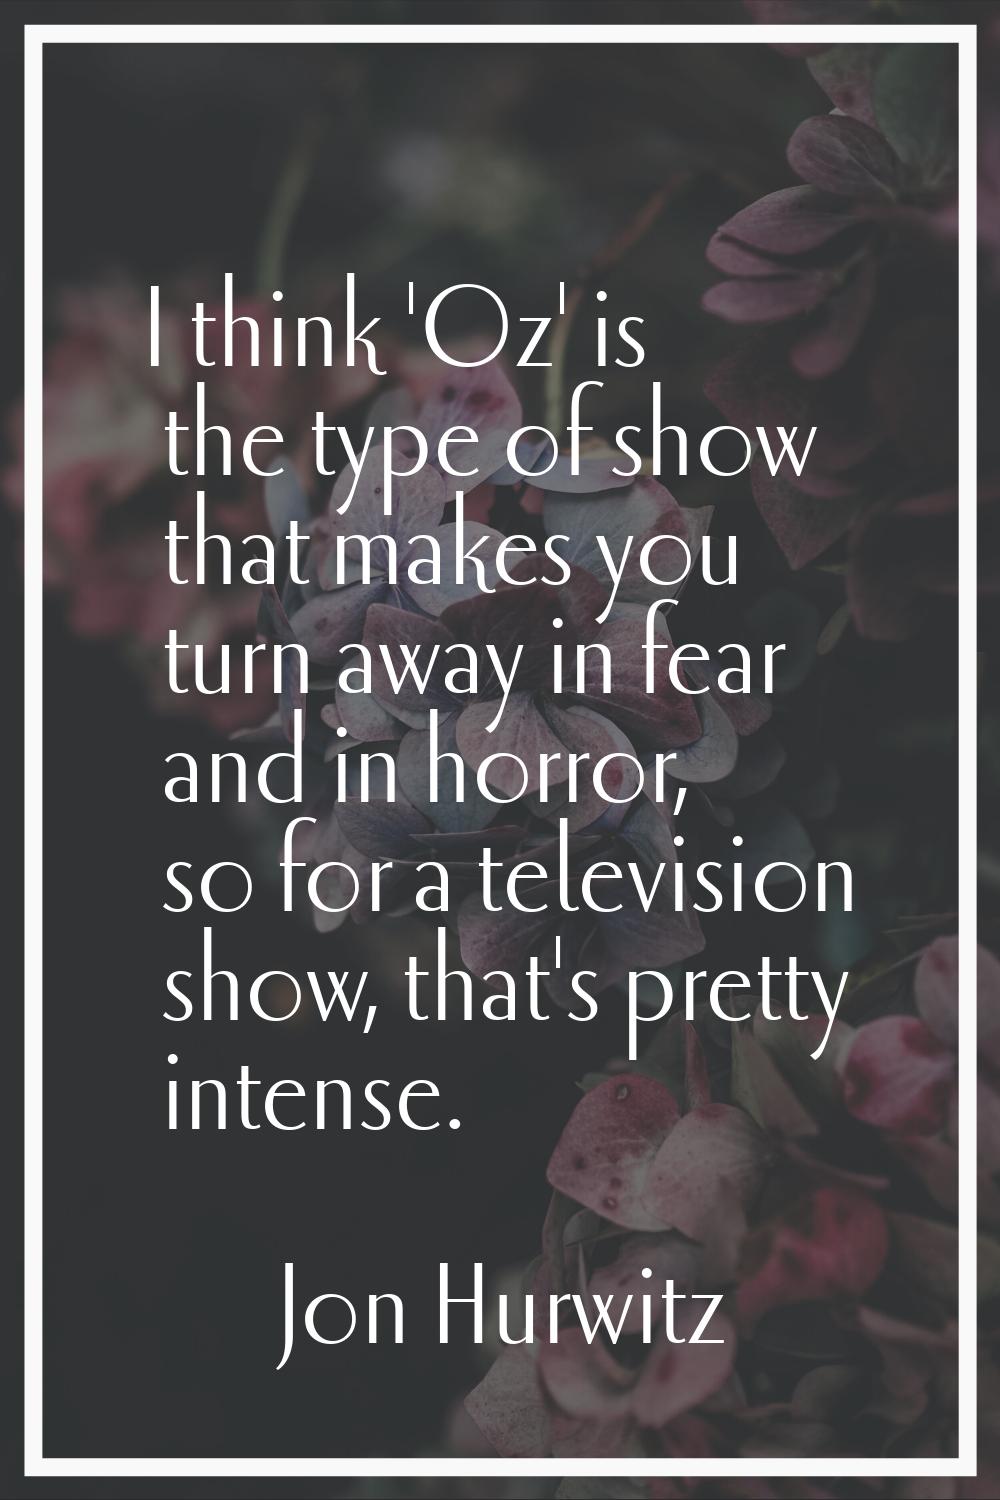 I think 'Oz' is the type of show that makes you turn away in fear and in horror, so for a televisio